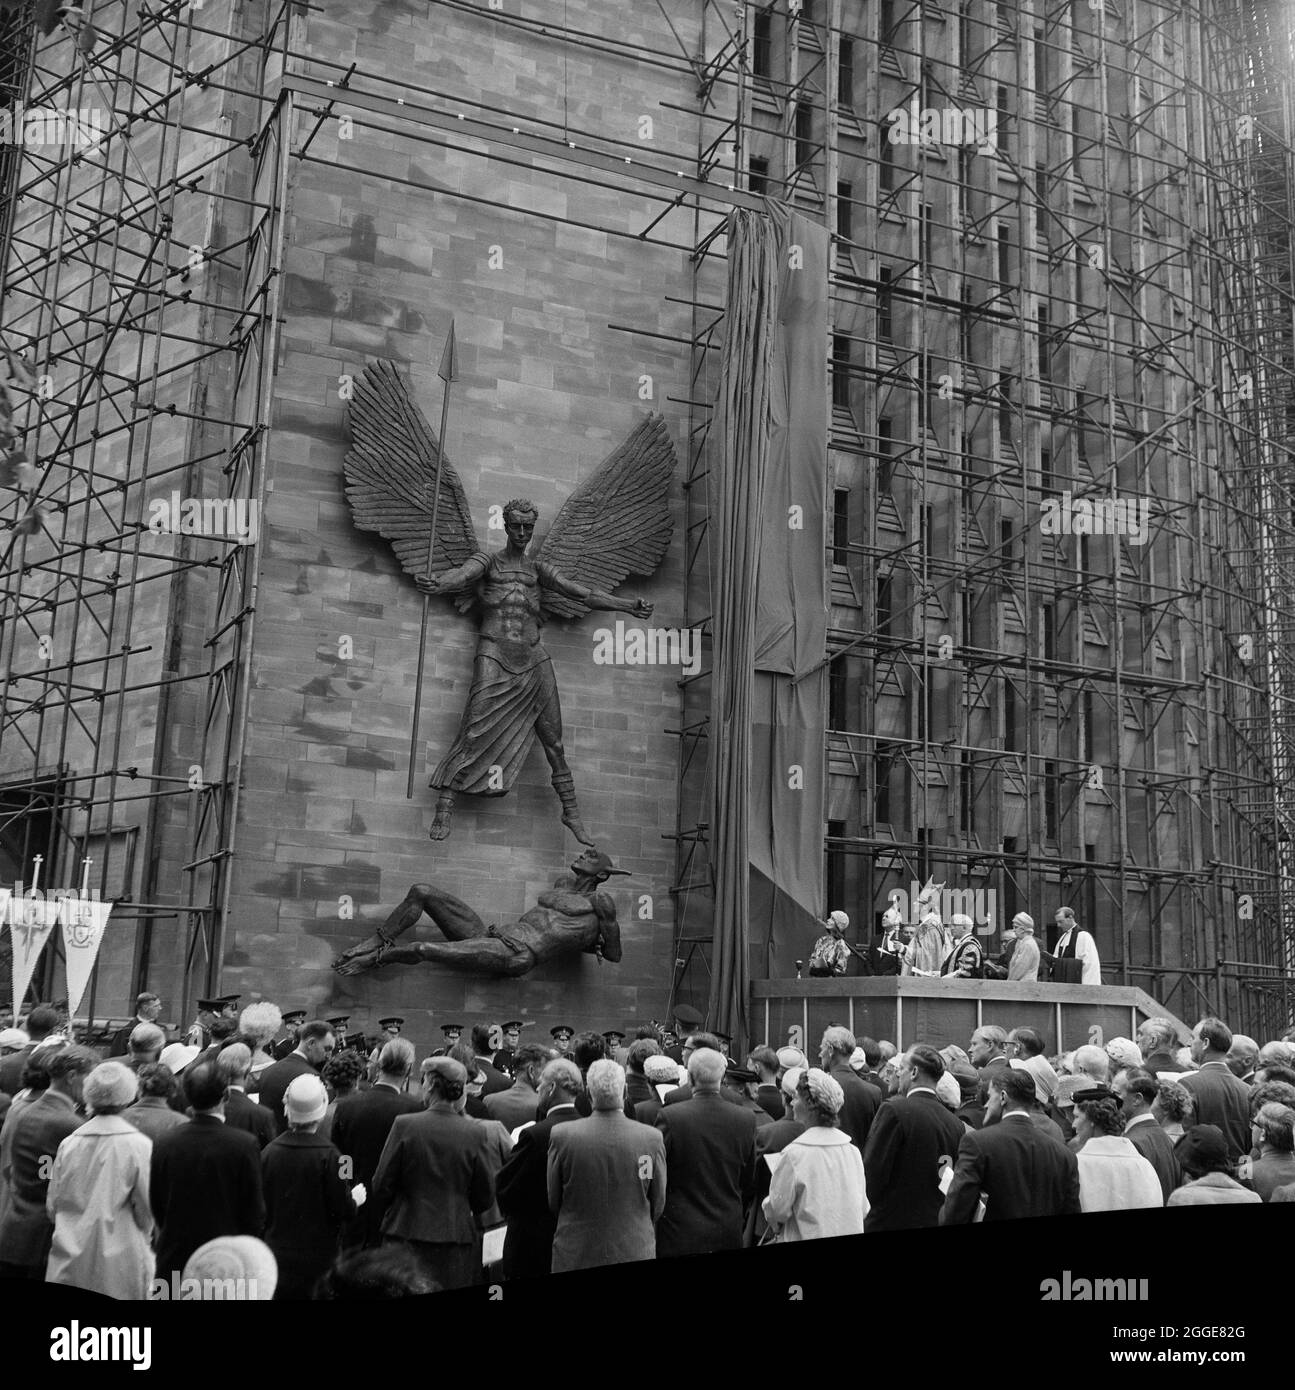 A crowd of people watching the unveiling ceremony of the statue St Michael and the Devil by sculptor Sir Jacob Epstein at Coventry Cathedral. The statue of the Archangel Michael overcoming the Devil was the last sculpture Sir Jacob Epstein created before he died in 1959. The statue overlooks the steps leading up to the entrance of Coventry Cathedral. The photograph shows the statue after it has been unveiled by his widow Lady Epstein, standing on the stage to the right. Stock Photo